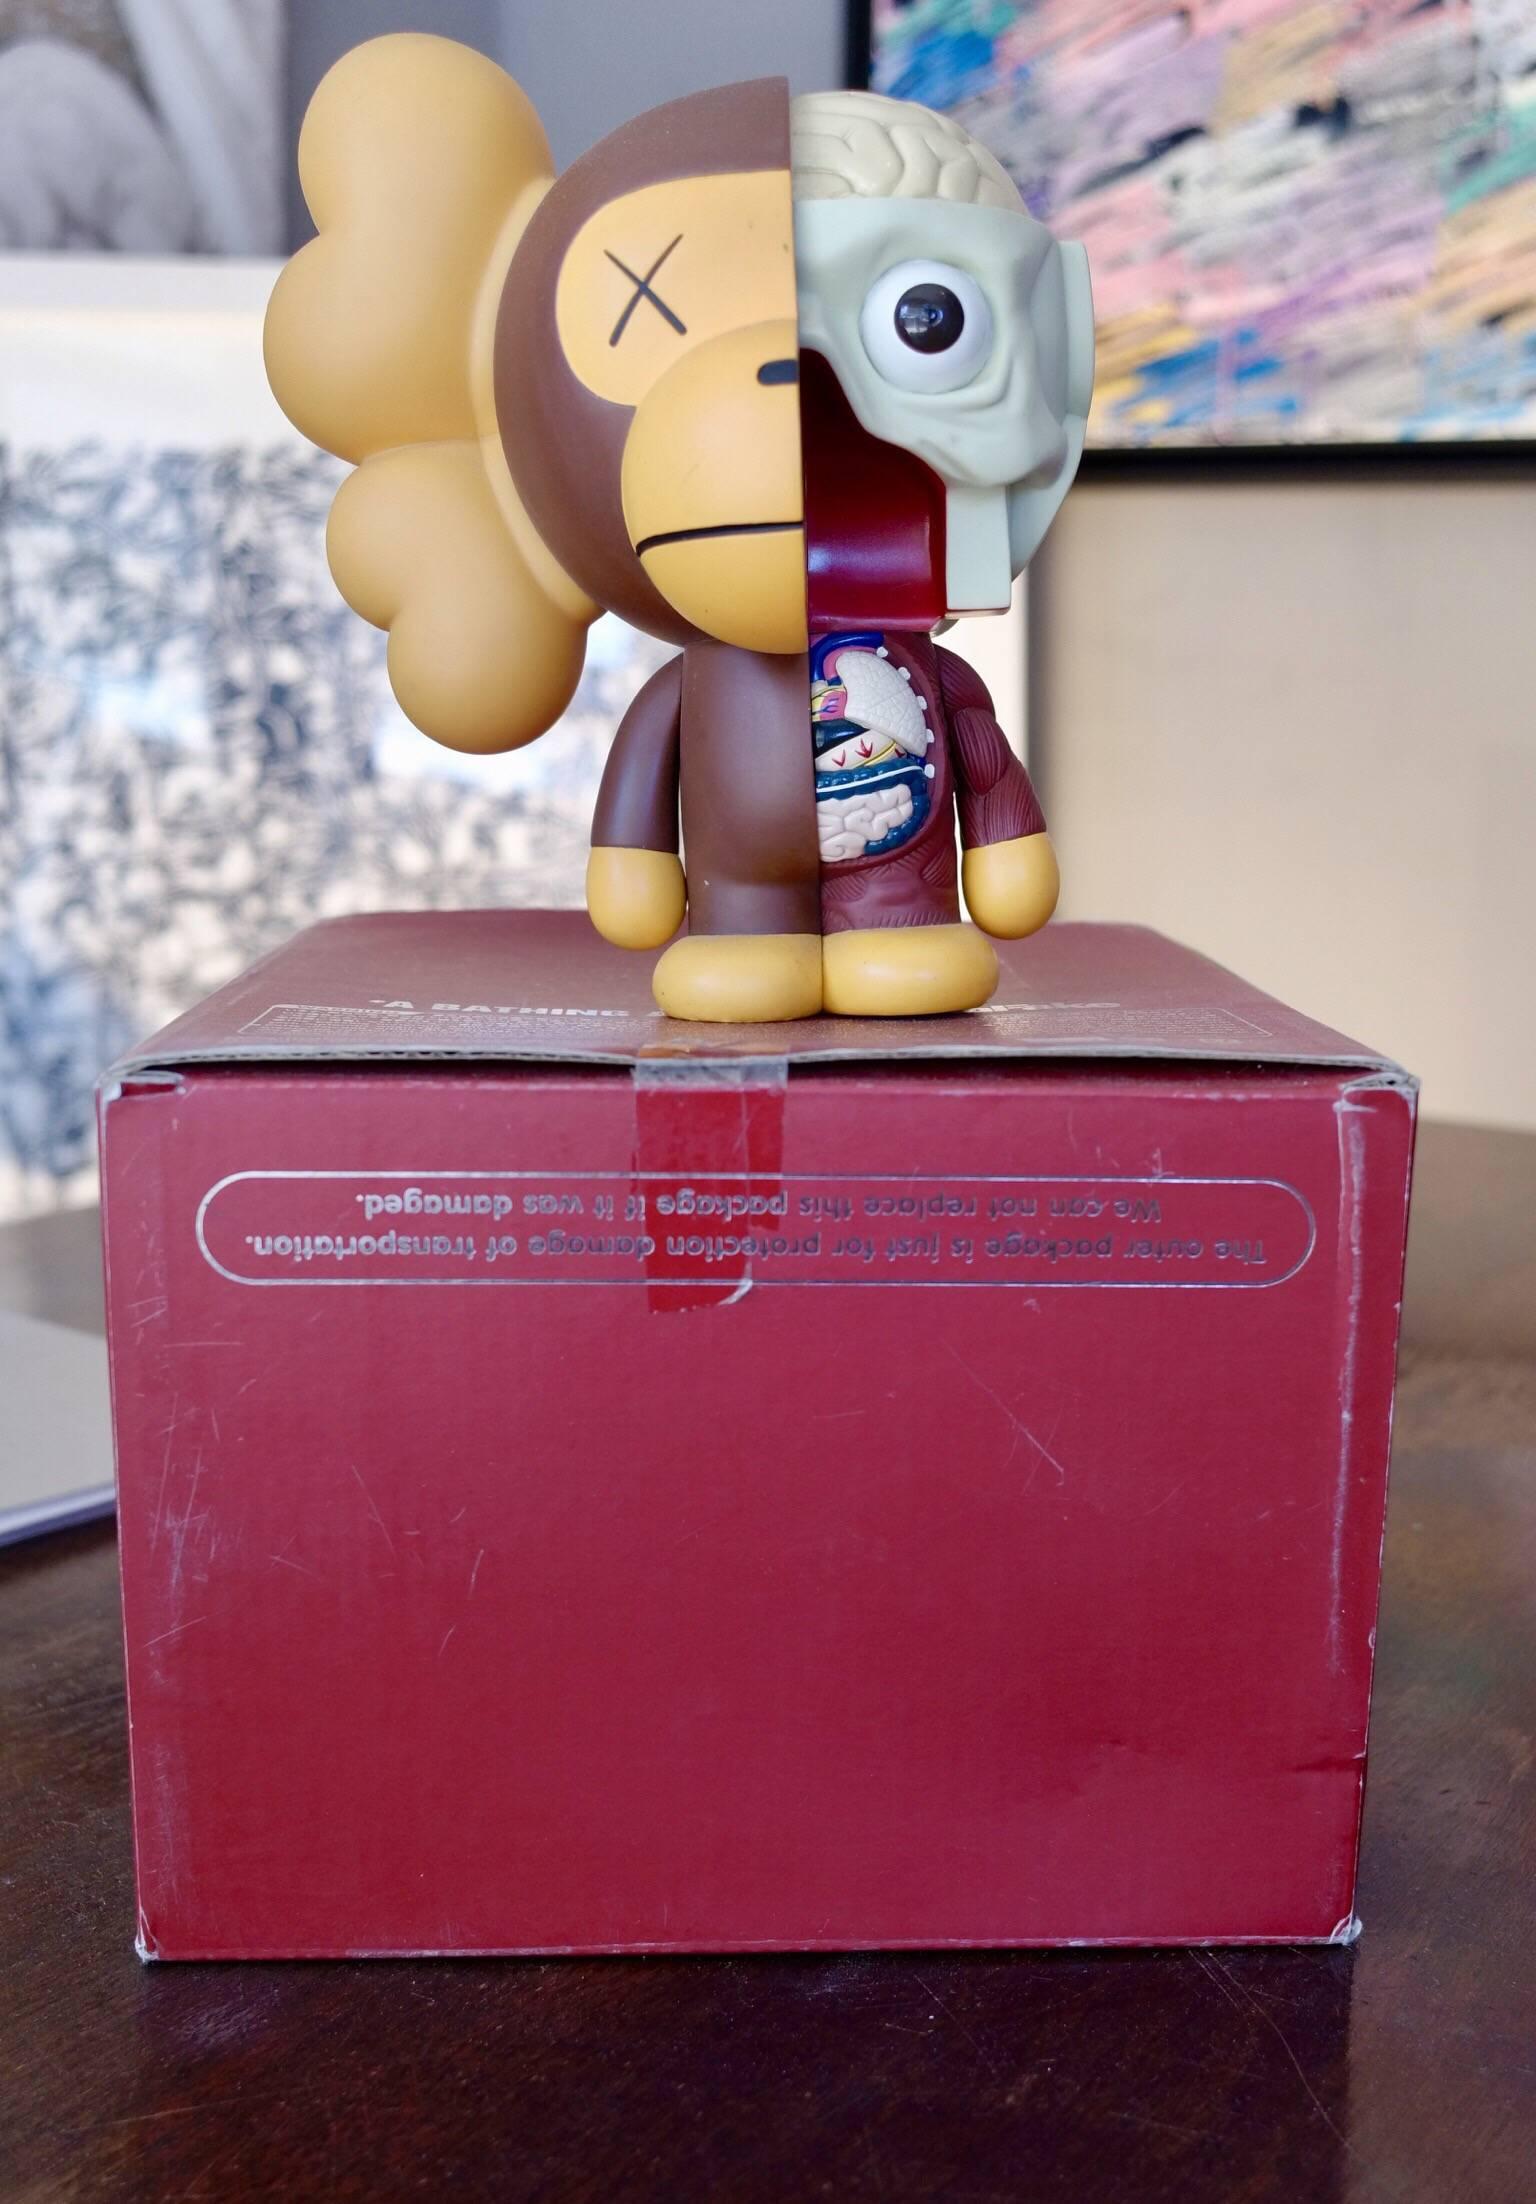 Kaws, Milo, 2011. 
A bathing ape. OriginalFake. 

Painted cast vinyl. 
In its original packaging / box. 
Produced and manufactured Medicom Toy, China.